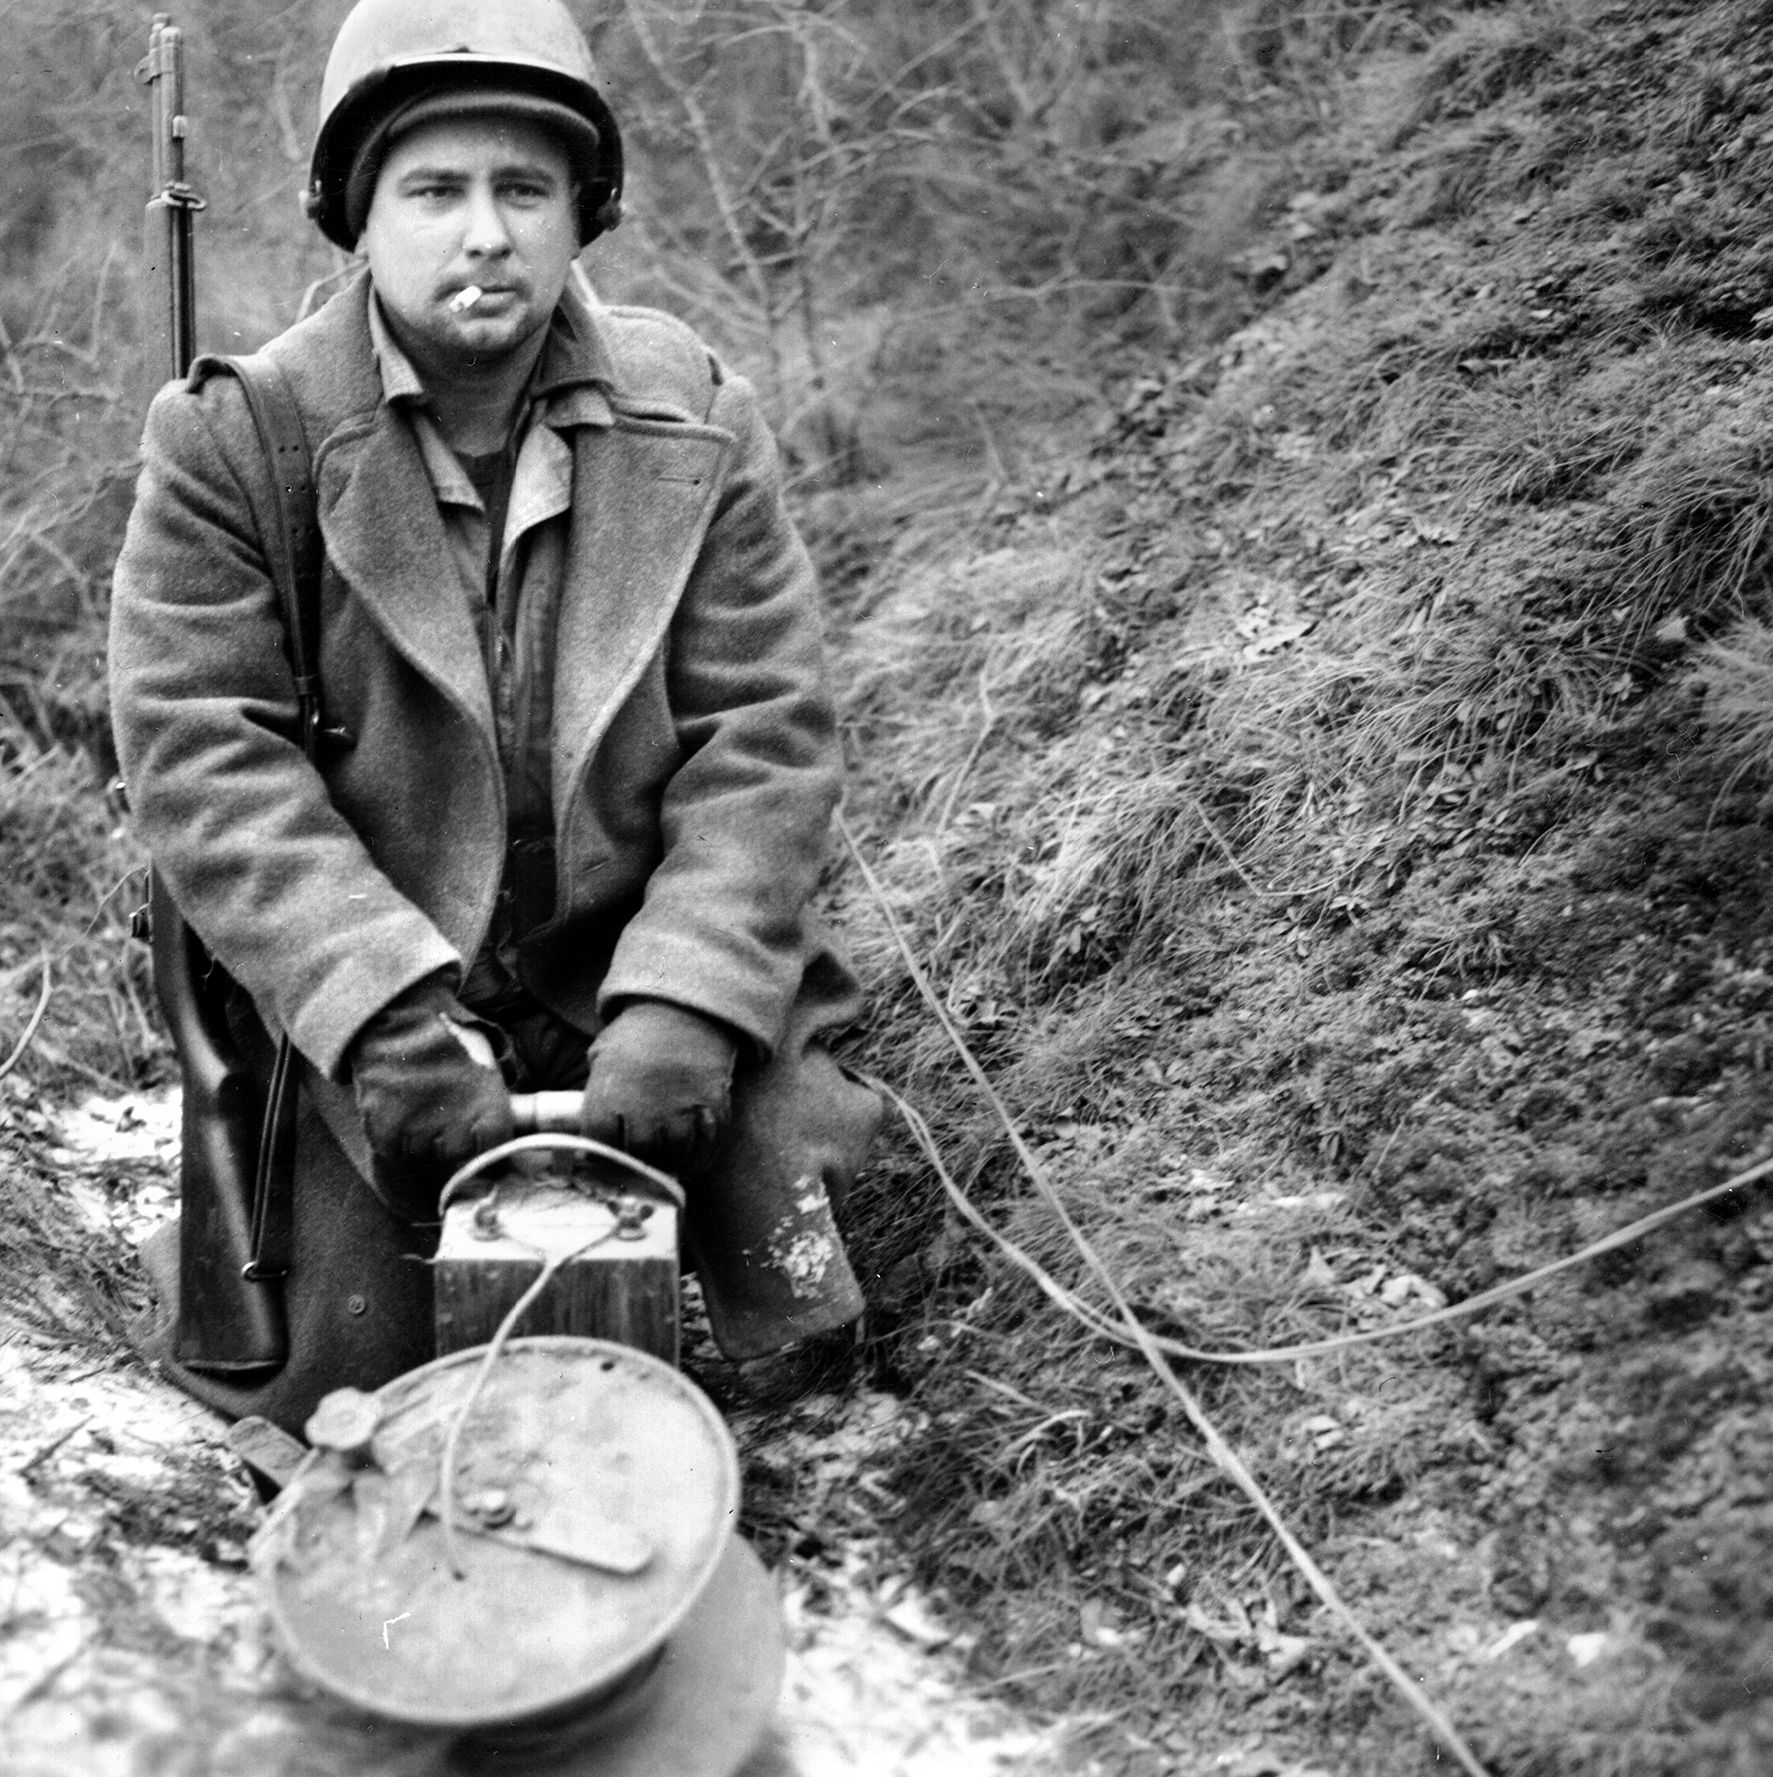 A U.S. Army combat engineer stands with hands on the plunger of a detonator box. Engineers have just completed wiring explosives to large trees along a roadway, expecting the detonation to fell the trees and block the progress of the Nazi spearheads toward the Meuse River during the Battle of the Bulge.